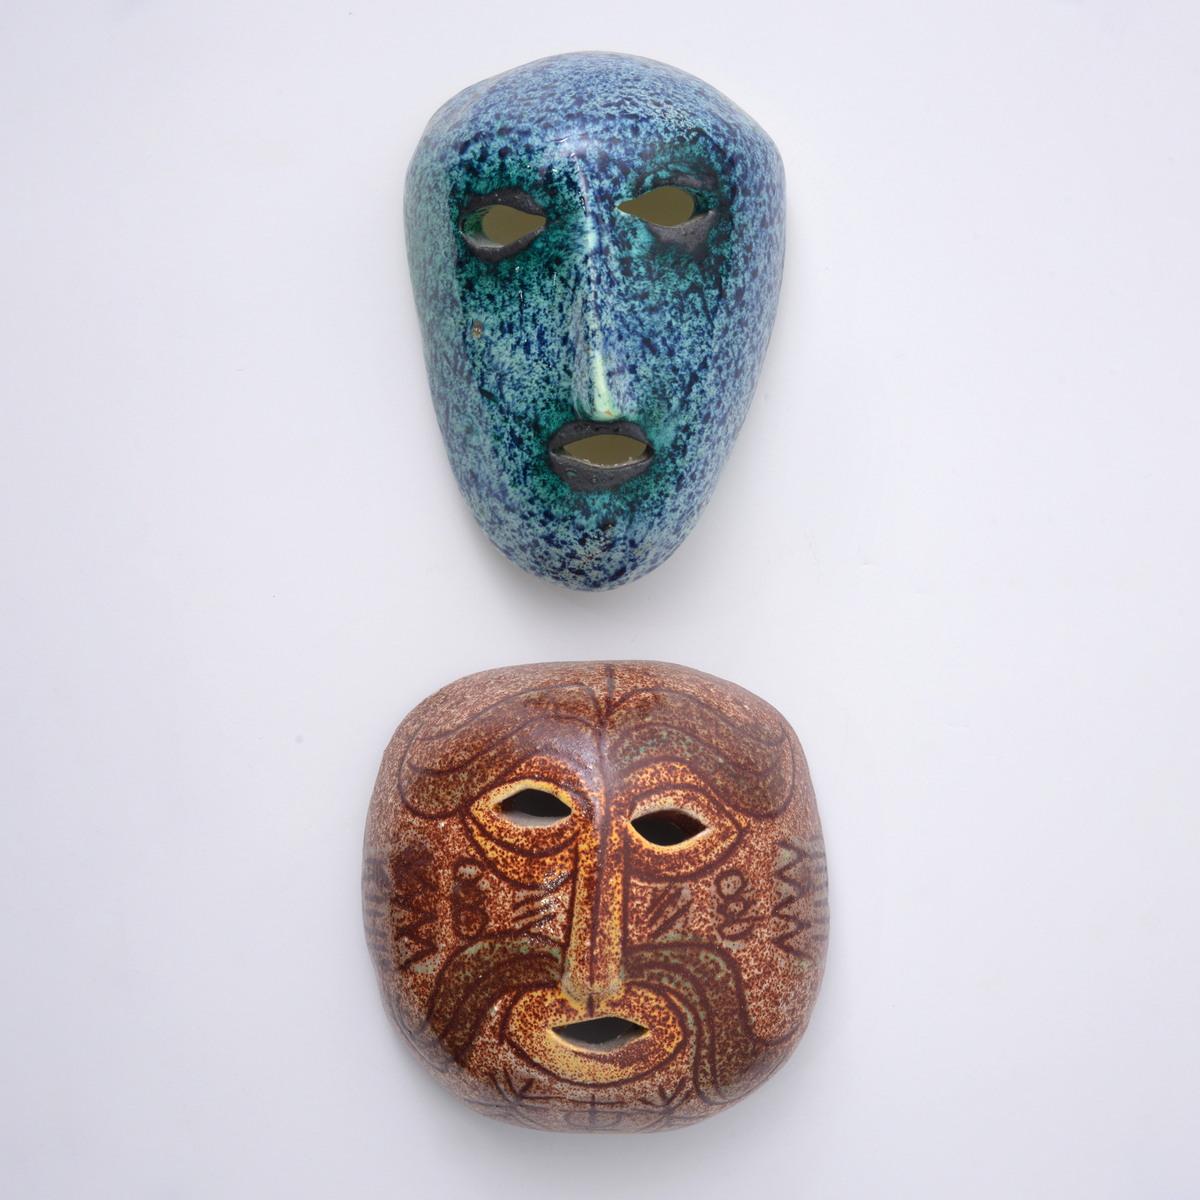 2 Slavic Paley for Accolay Pottery Masks - Contemporary Sculpture by Unknown